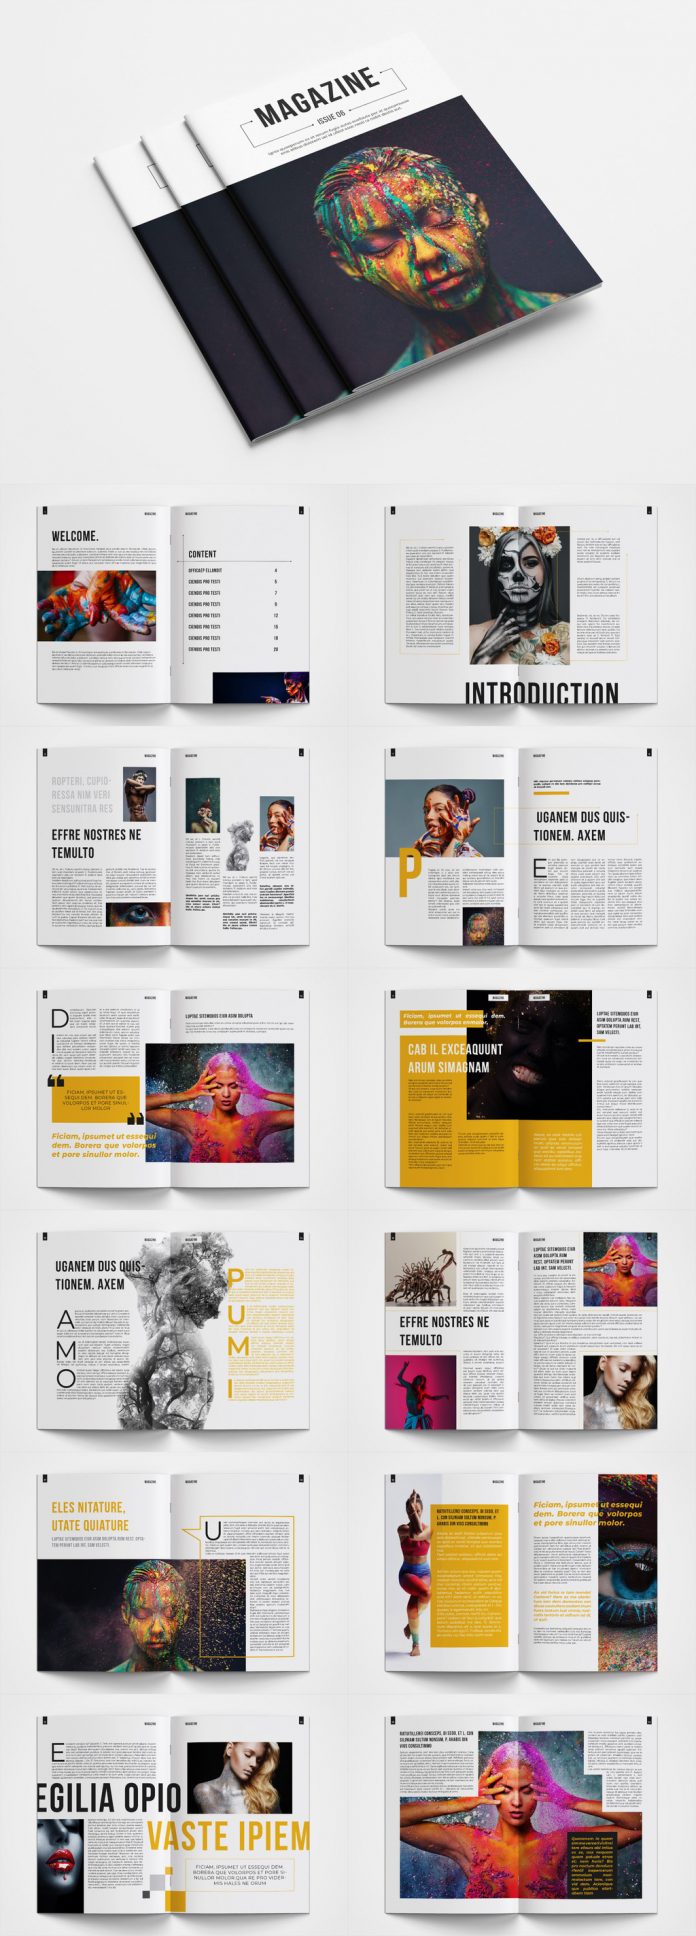 A fully customizable magazine template made for use in Adobe InDesign.